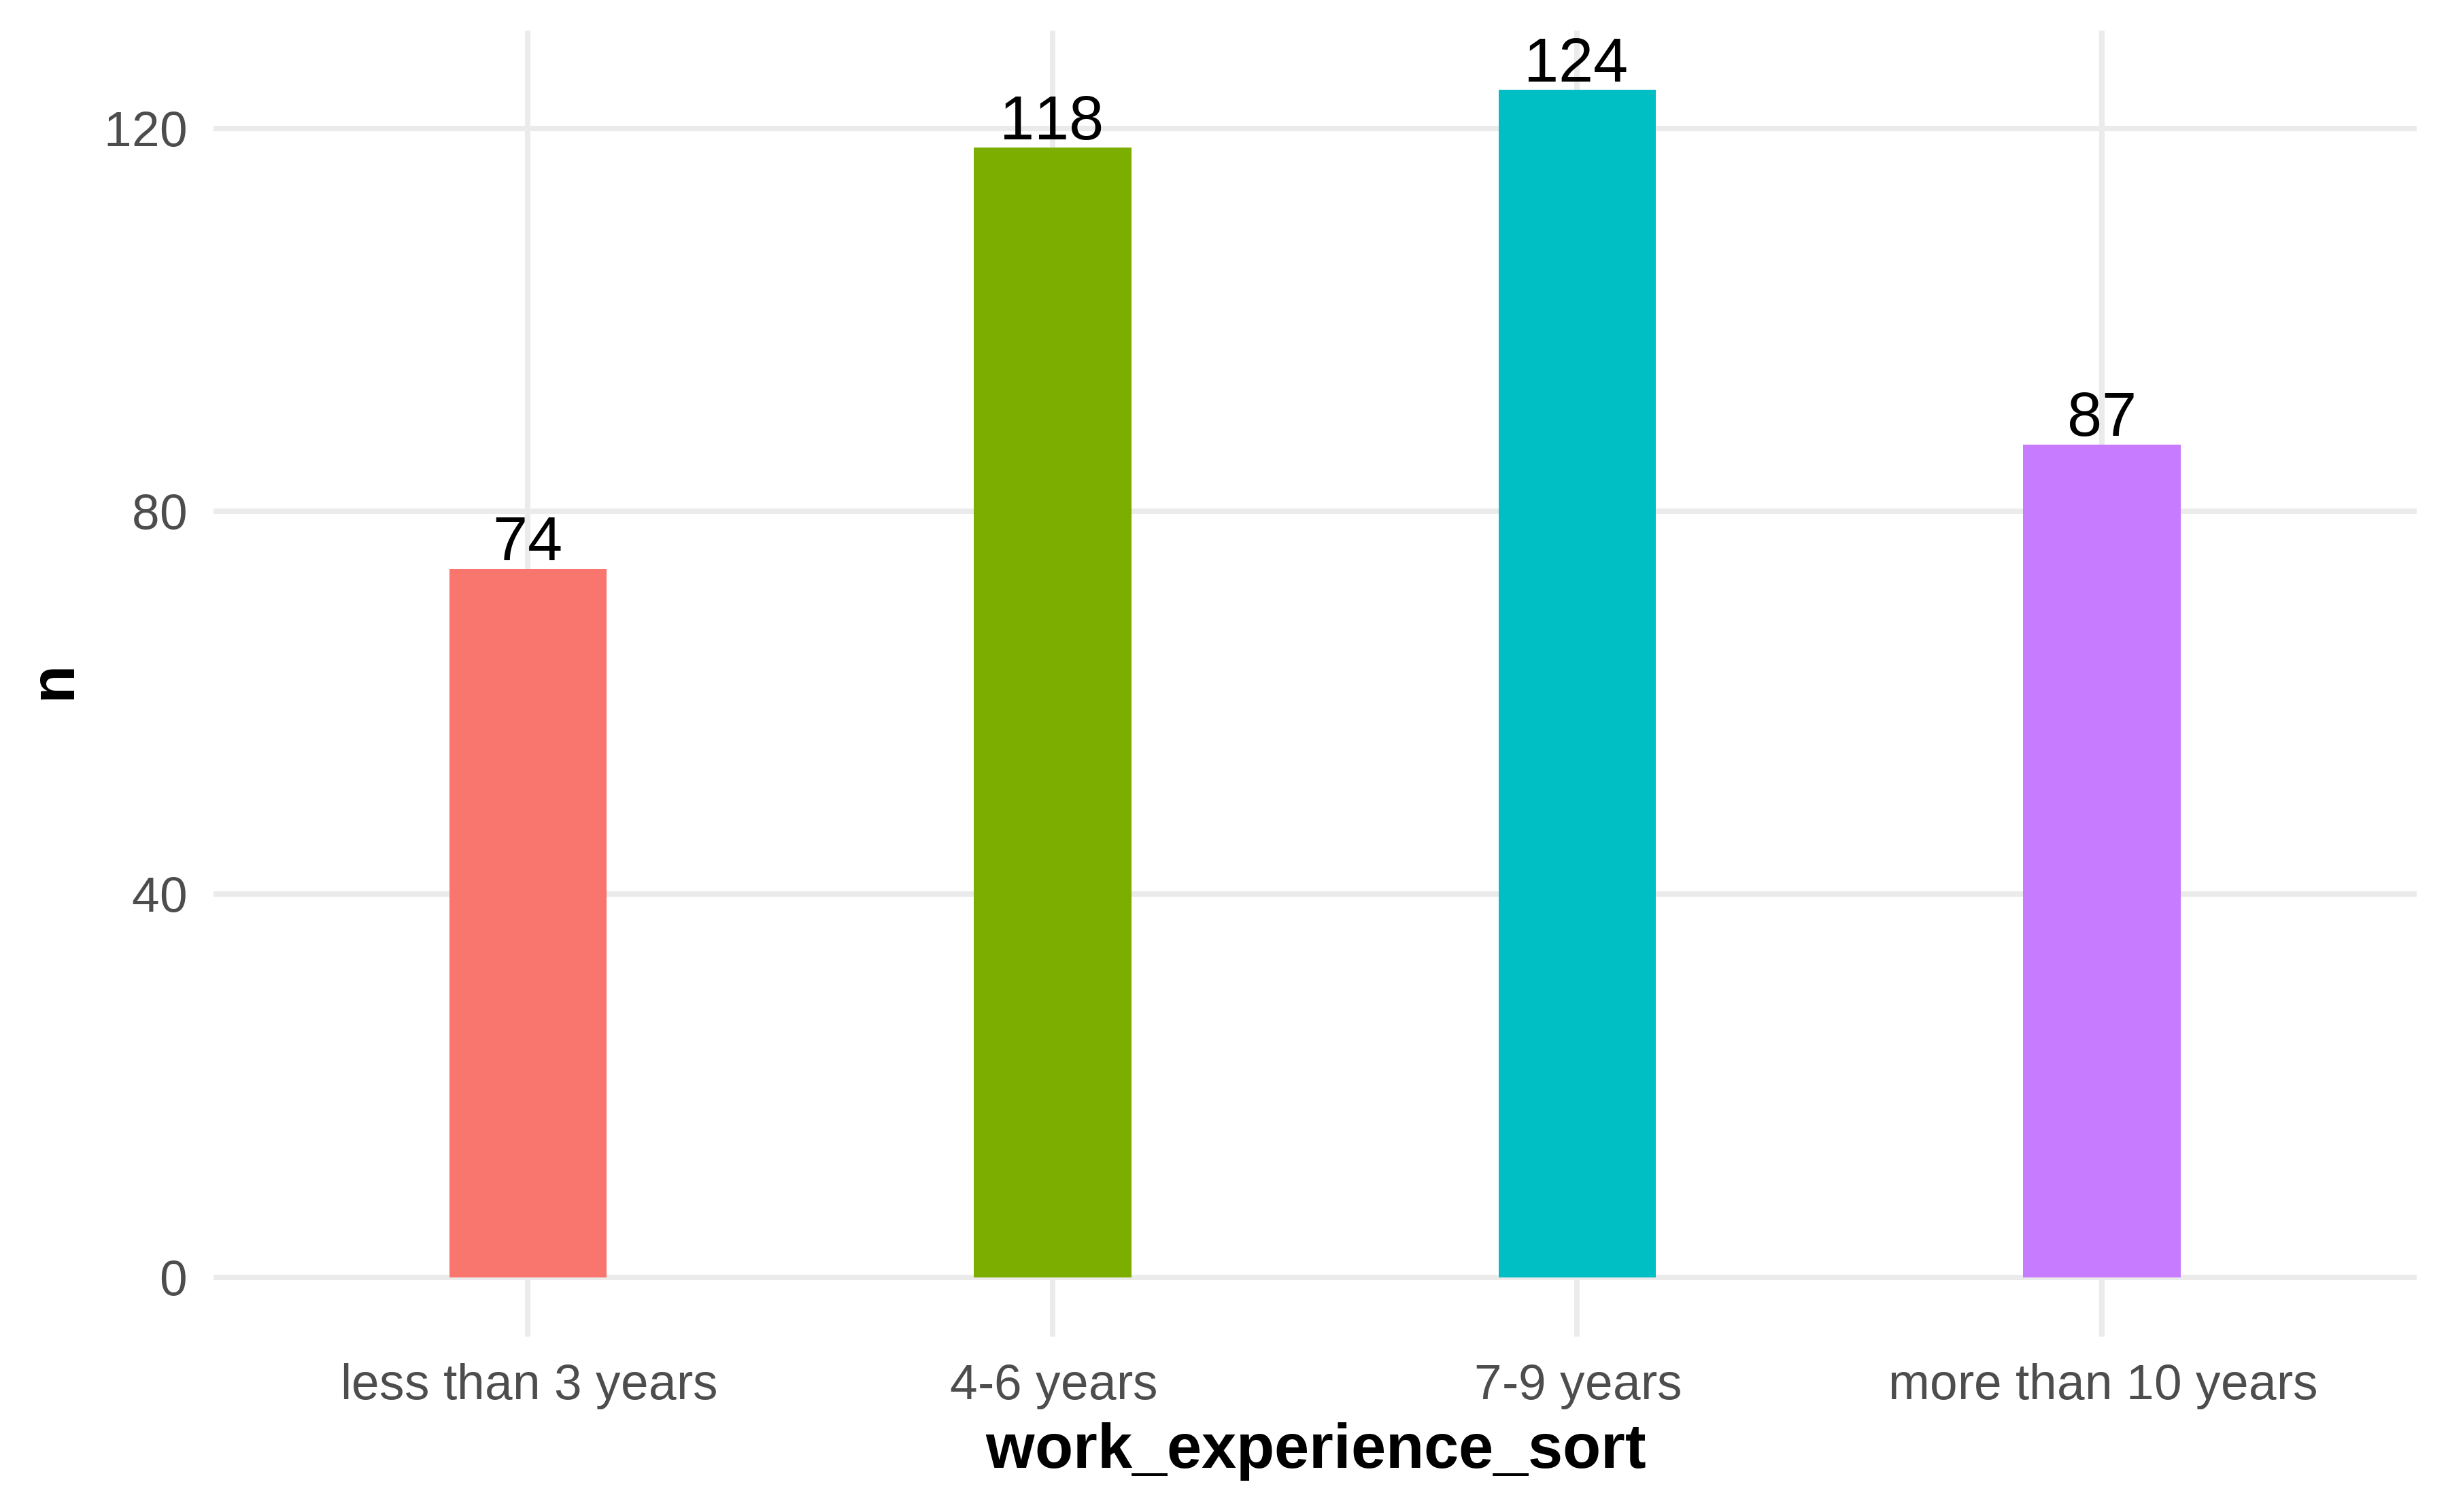 Frequency and Percentage of Work Experience